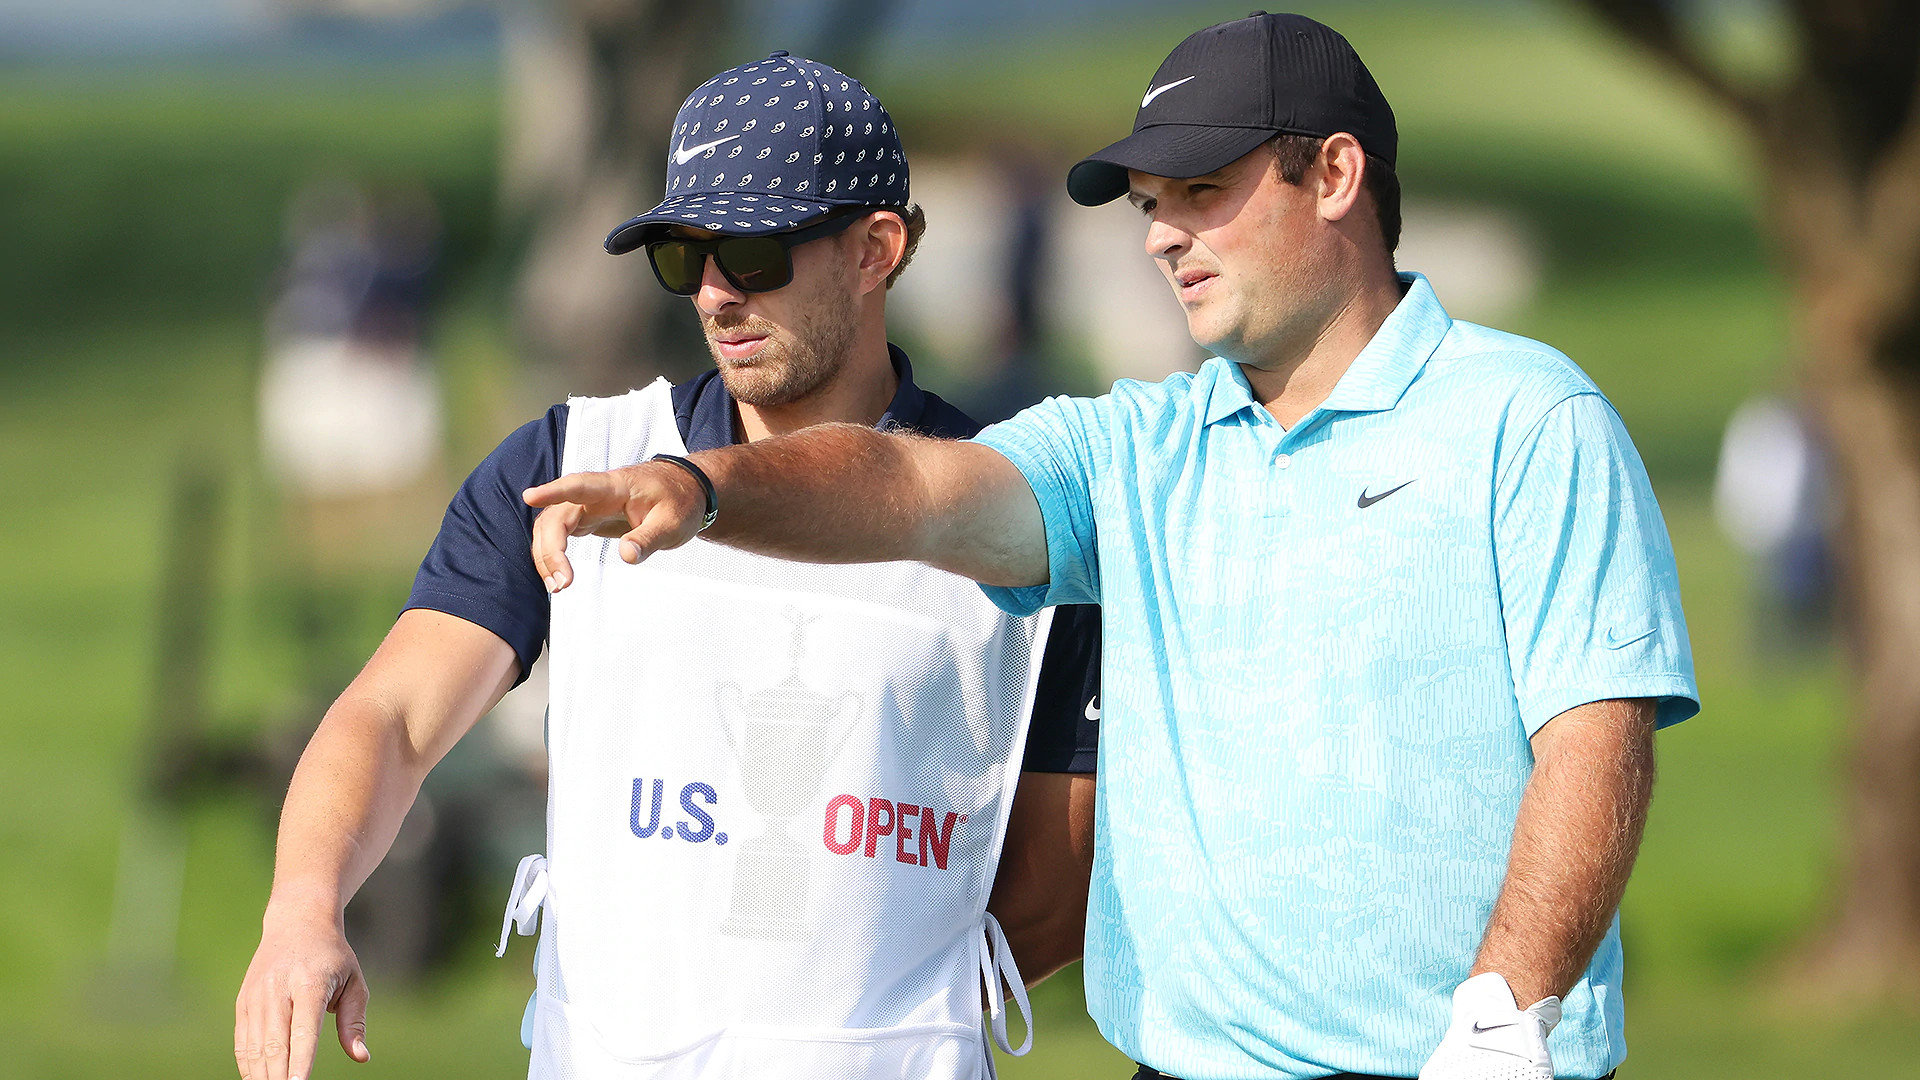 Patrick Reed looking forward to comfortable pairing with Bryson DeChambeau